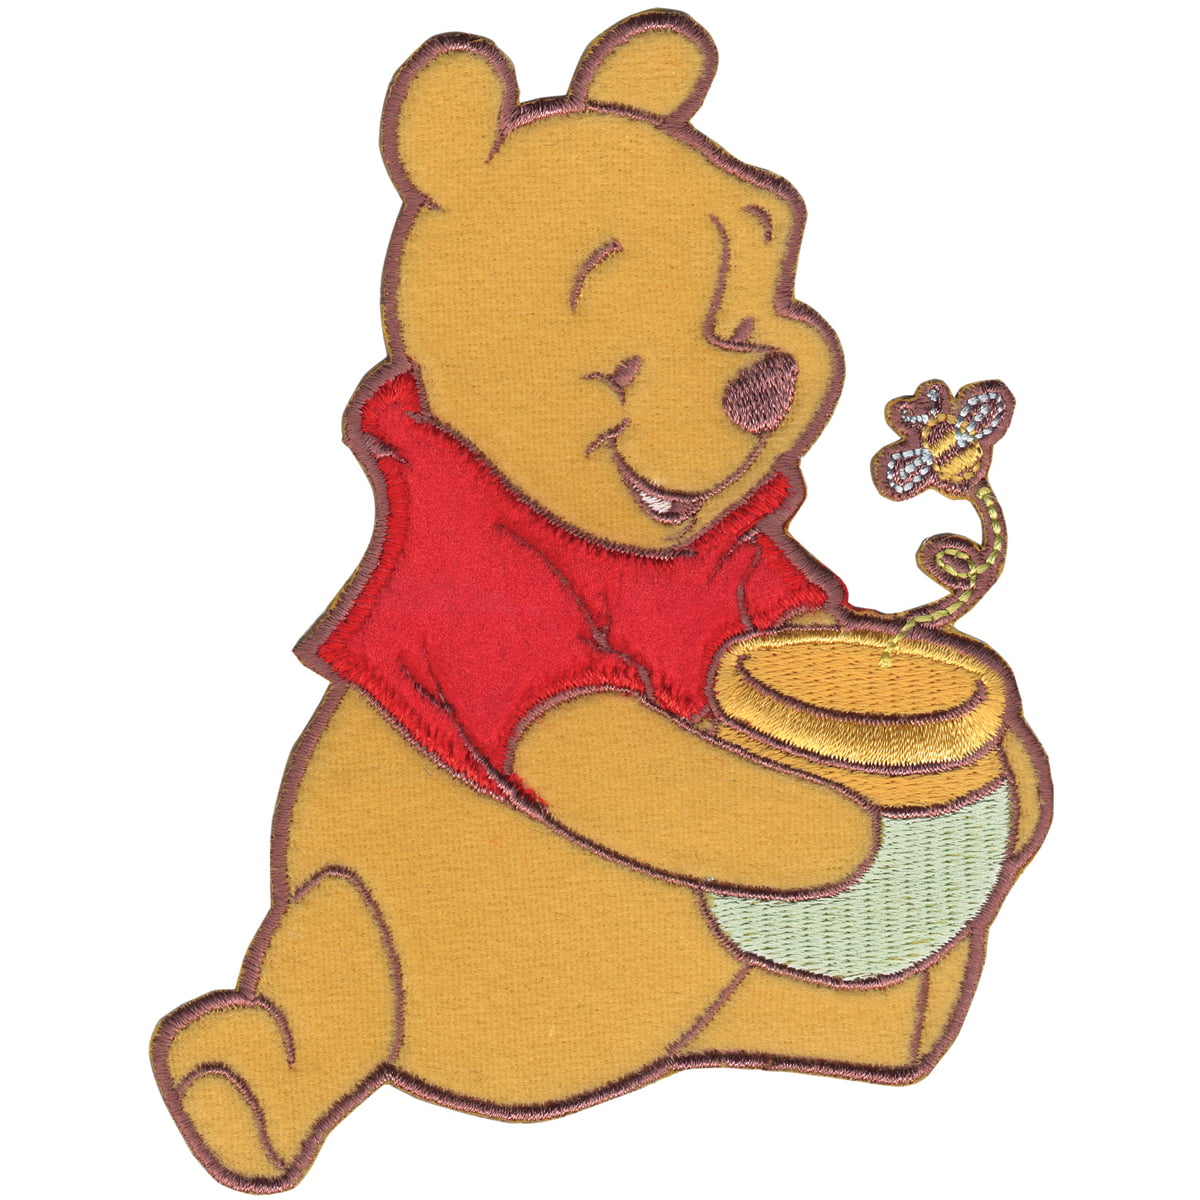 Pooh Bear & Honey Snack Iron on Patch DIY Children's Outfit Decoration Applique